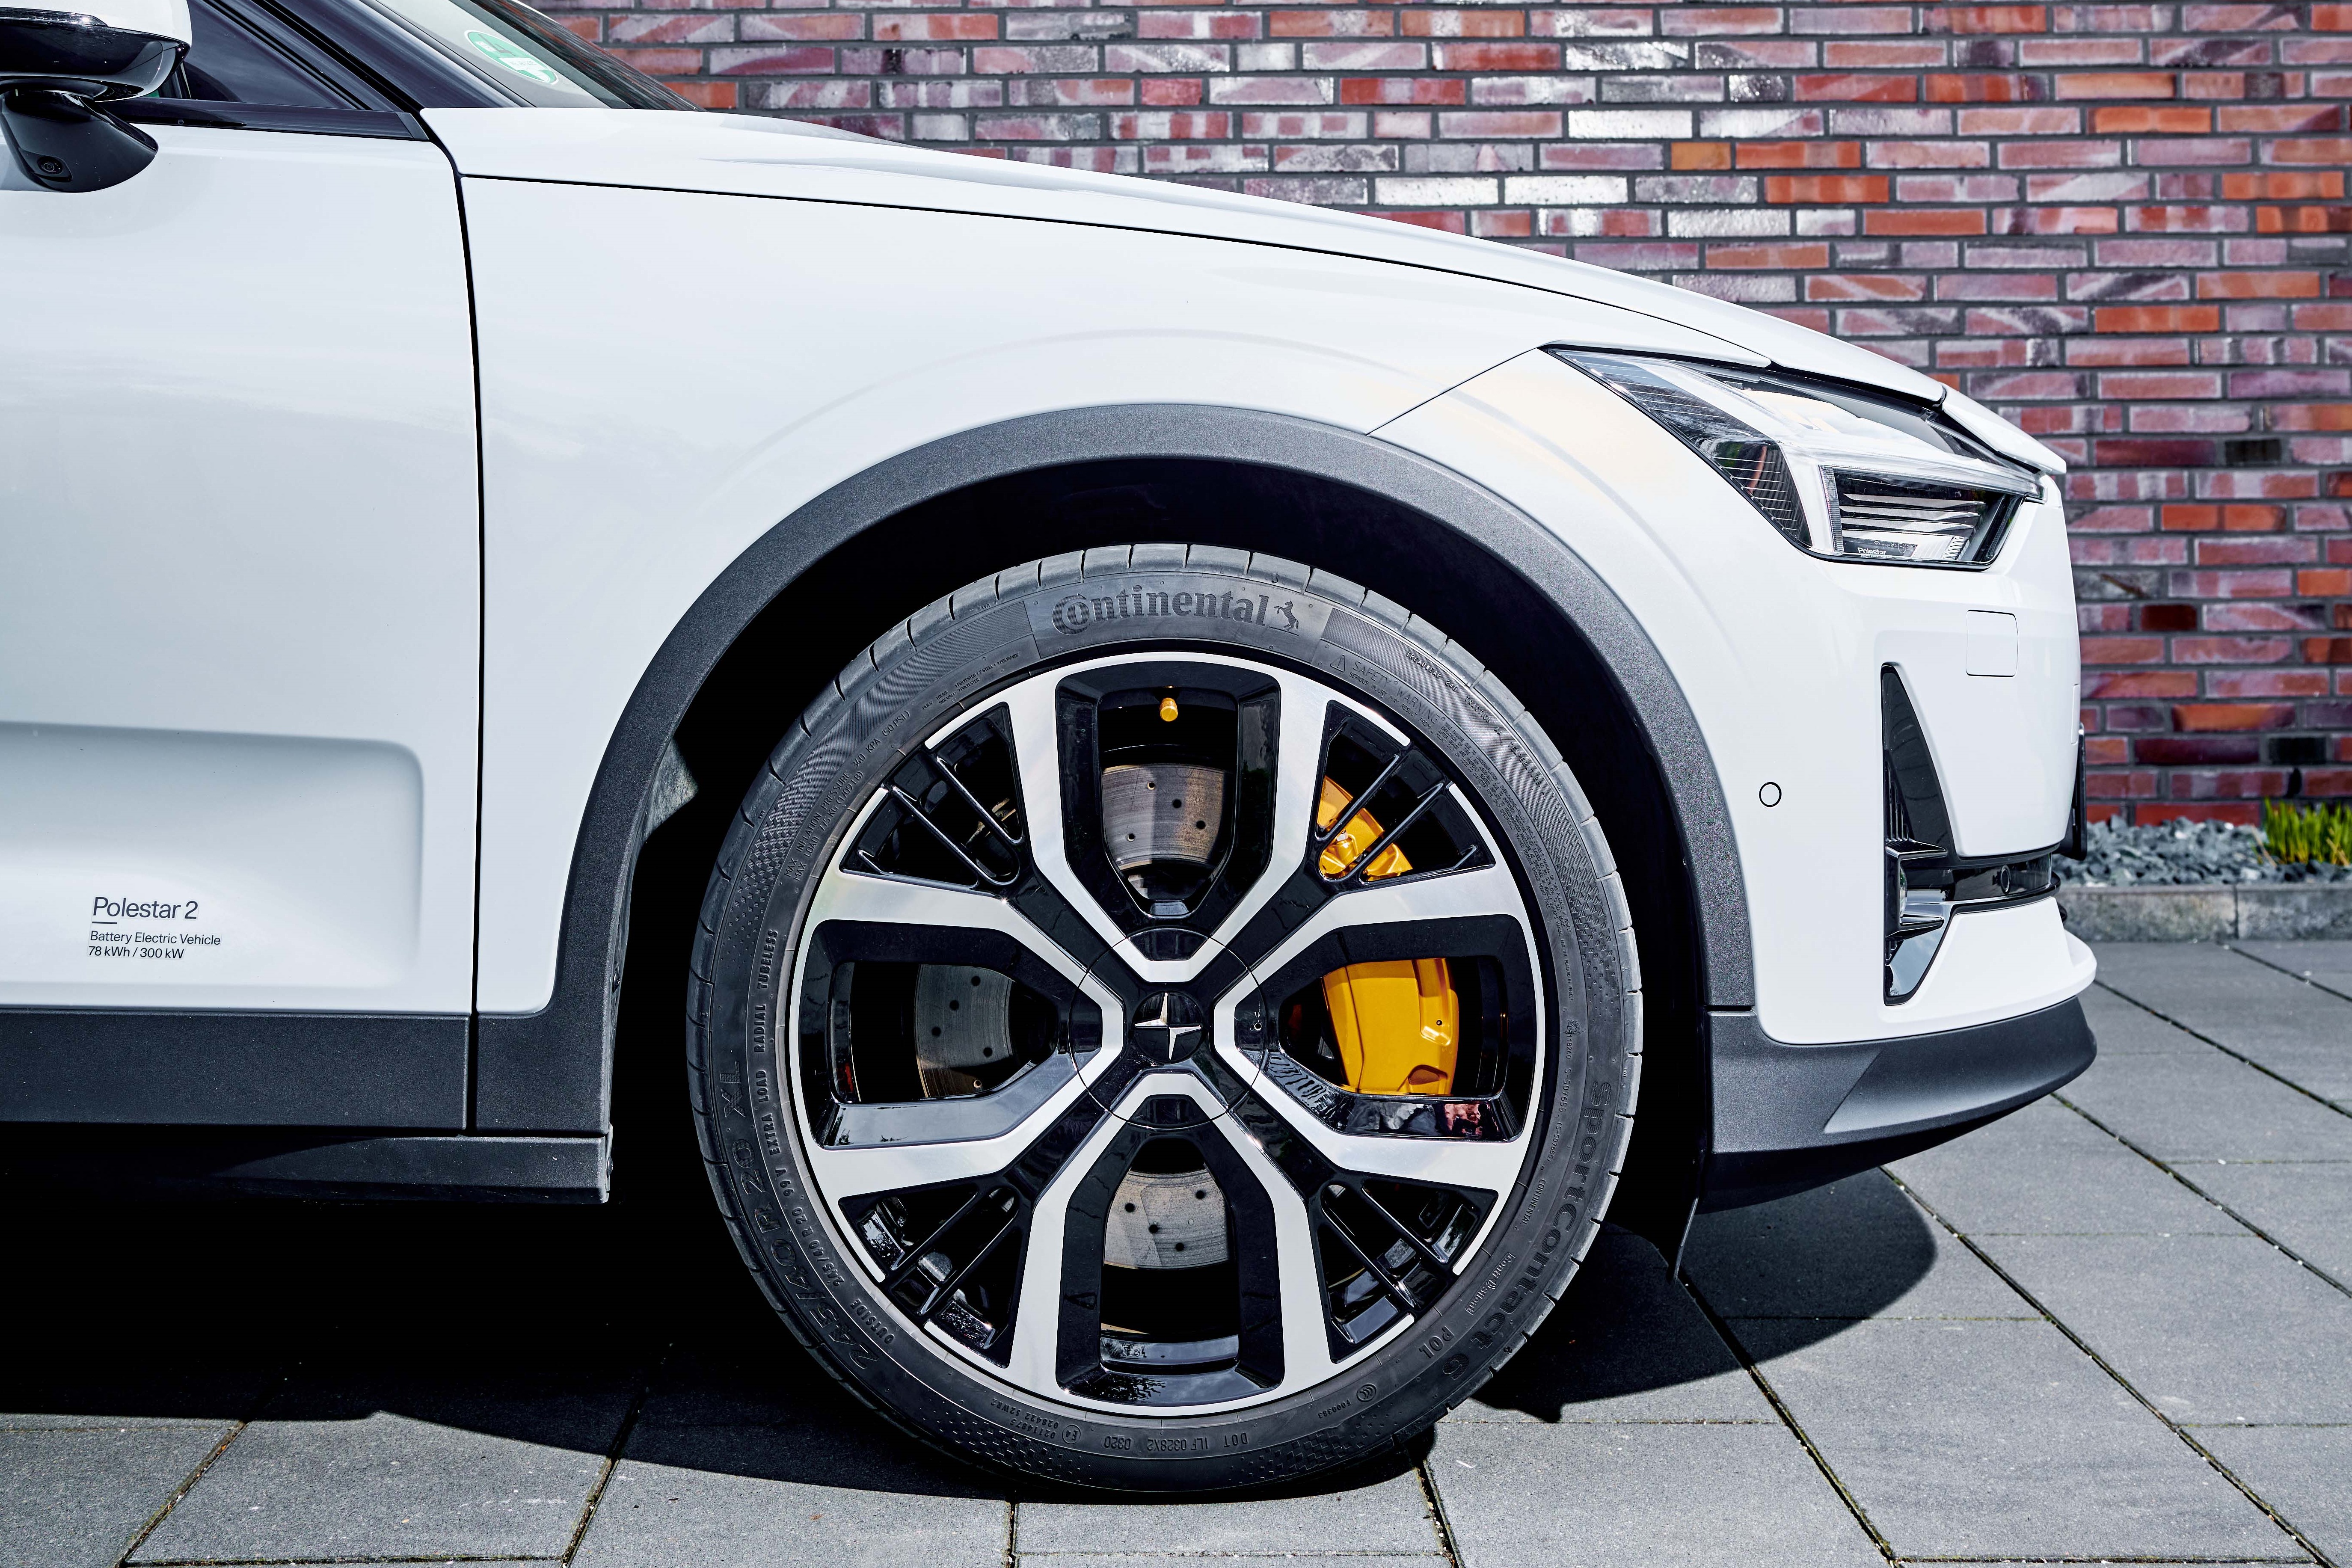 Continental Supplies PremiumContact 6 and SportContact 6 for the Polestar 2  - Continental AG